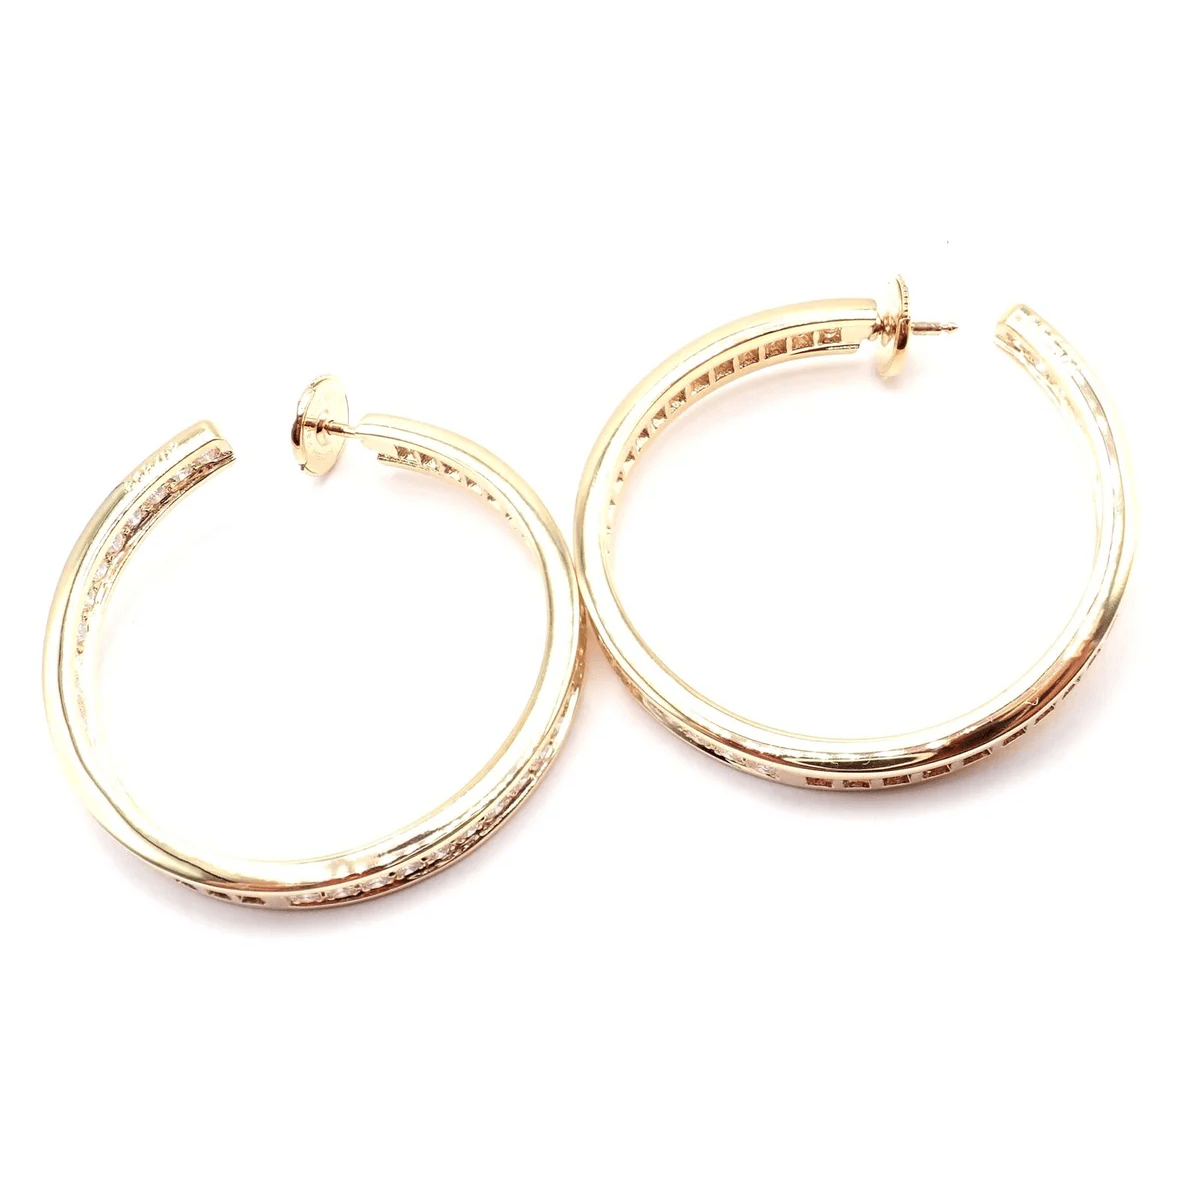 Cartier French Post-1980s 18KT Yellow Gold Diamond Earrings profile